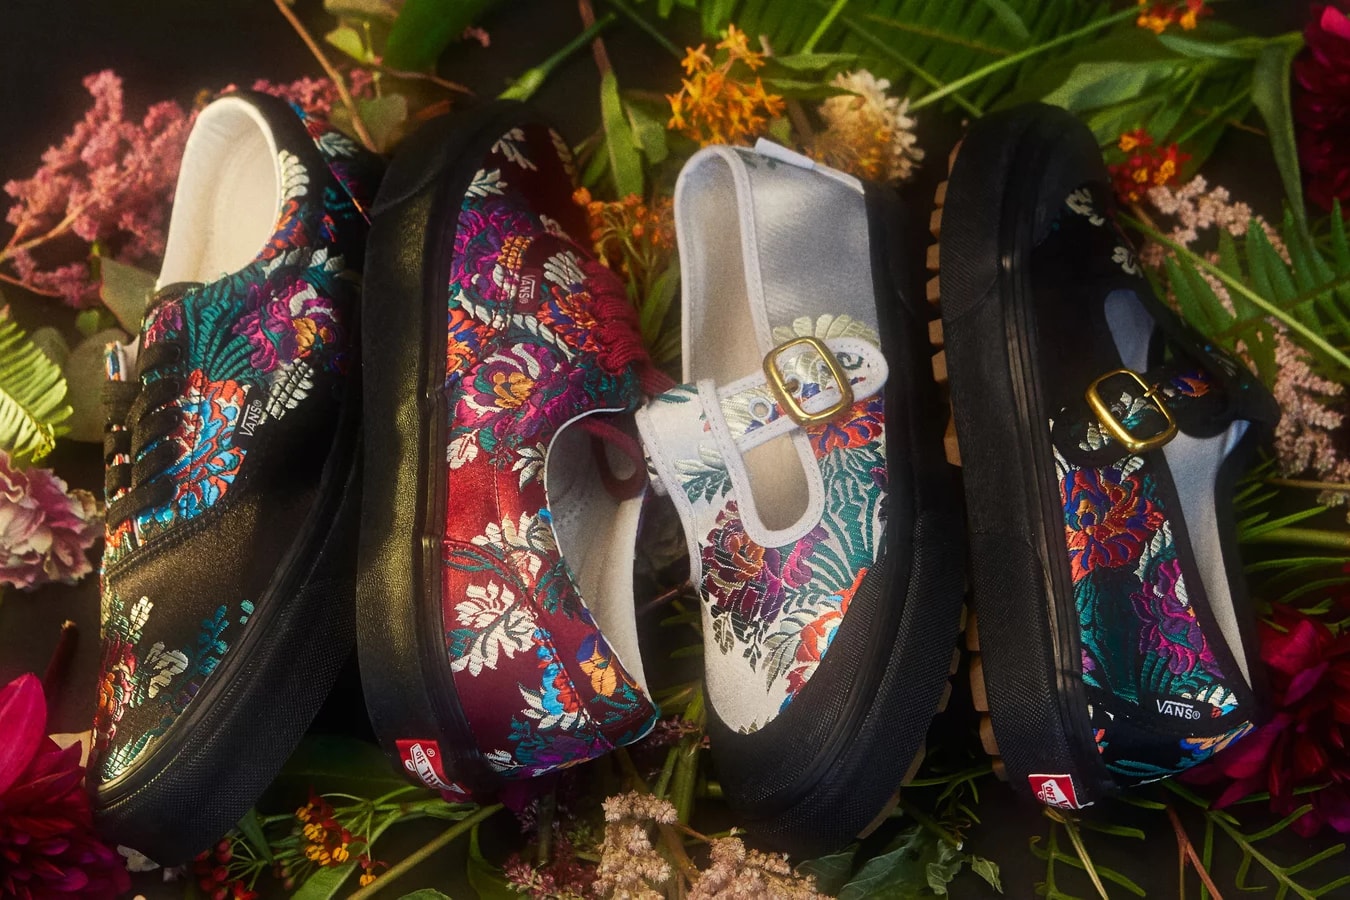 Opening Ceremony x Vans Release the Satin Floral Pack